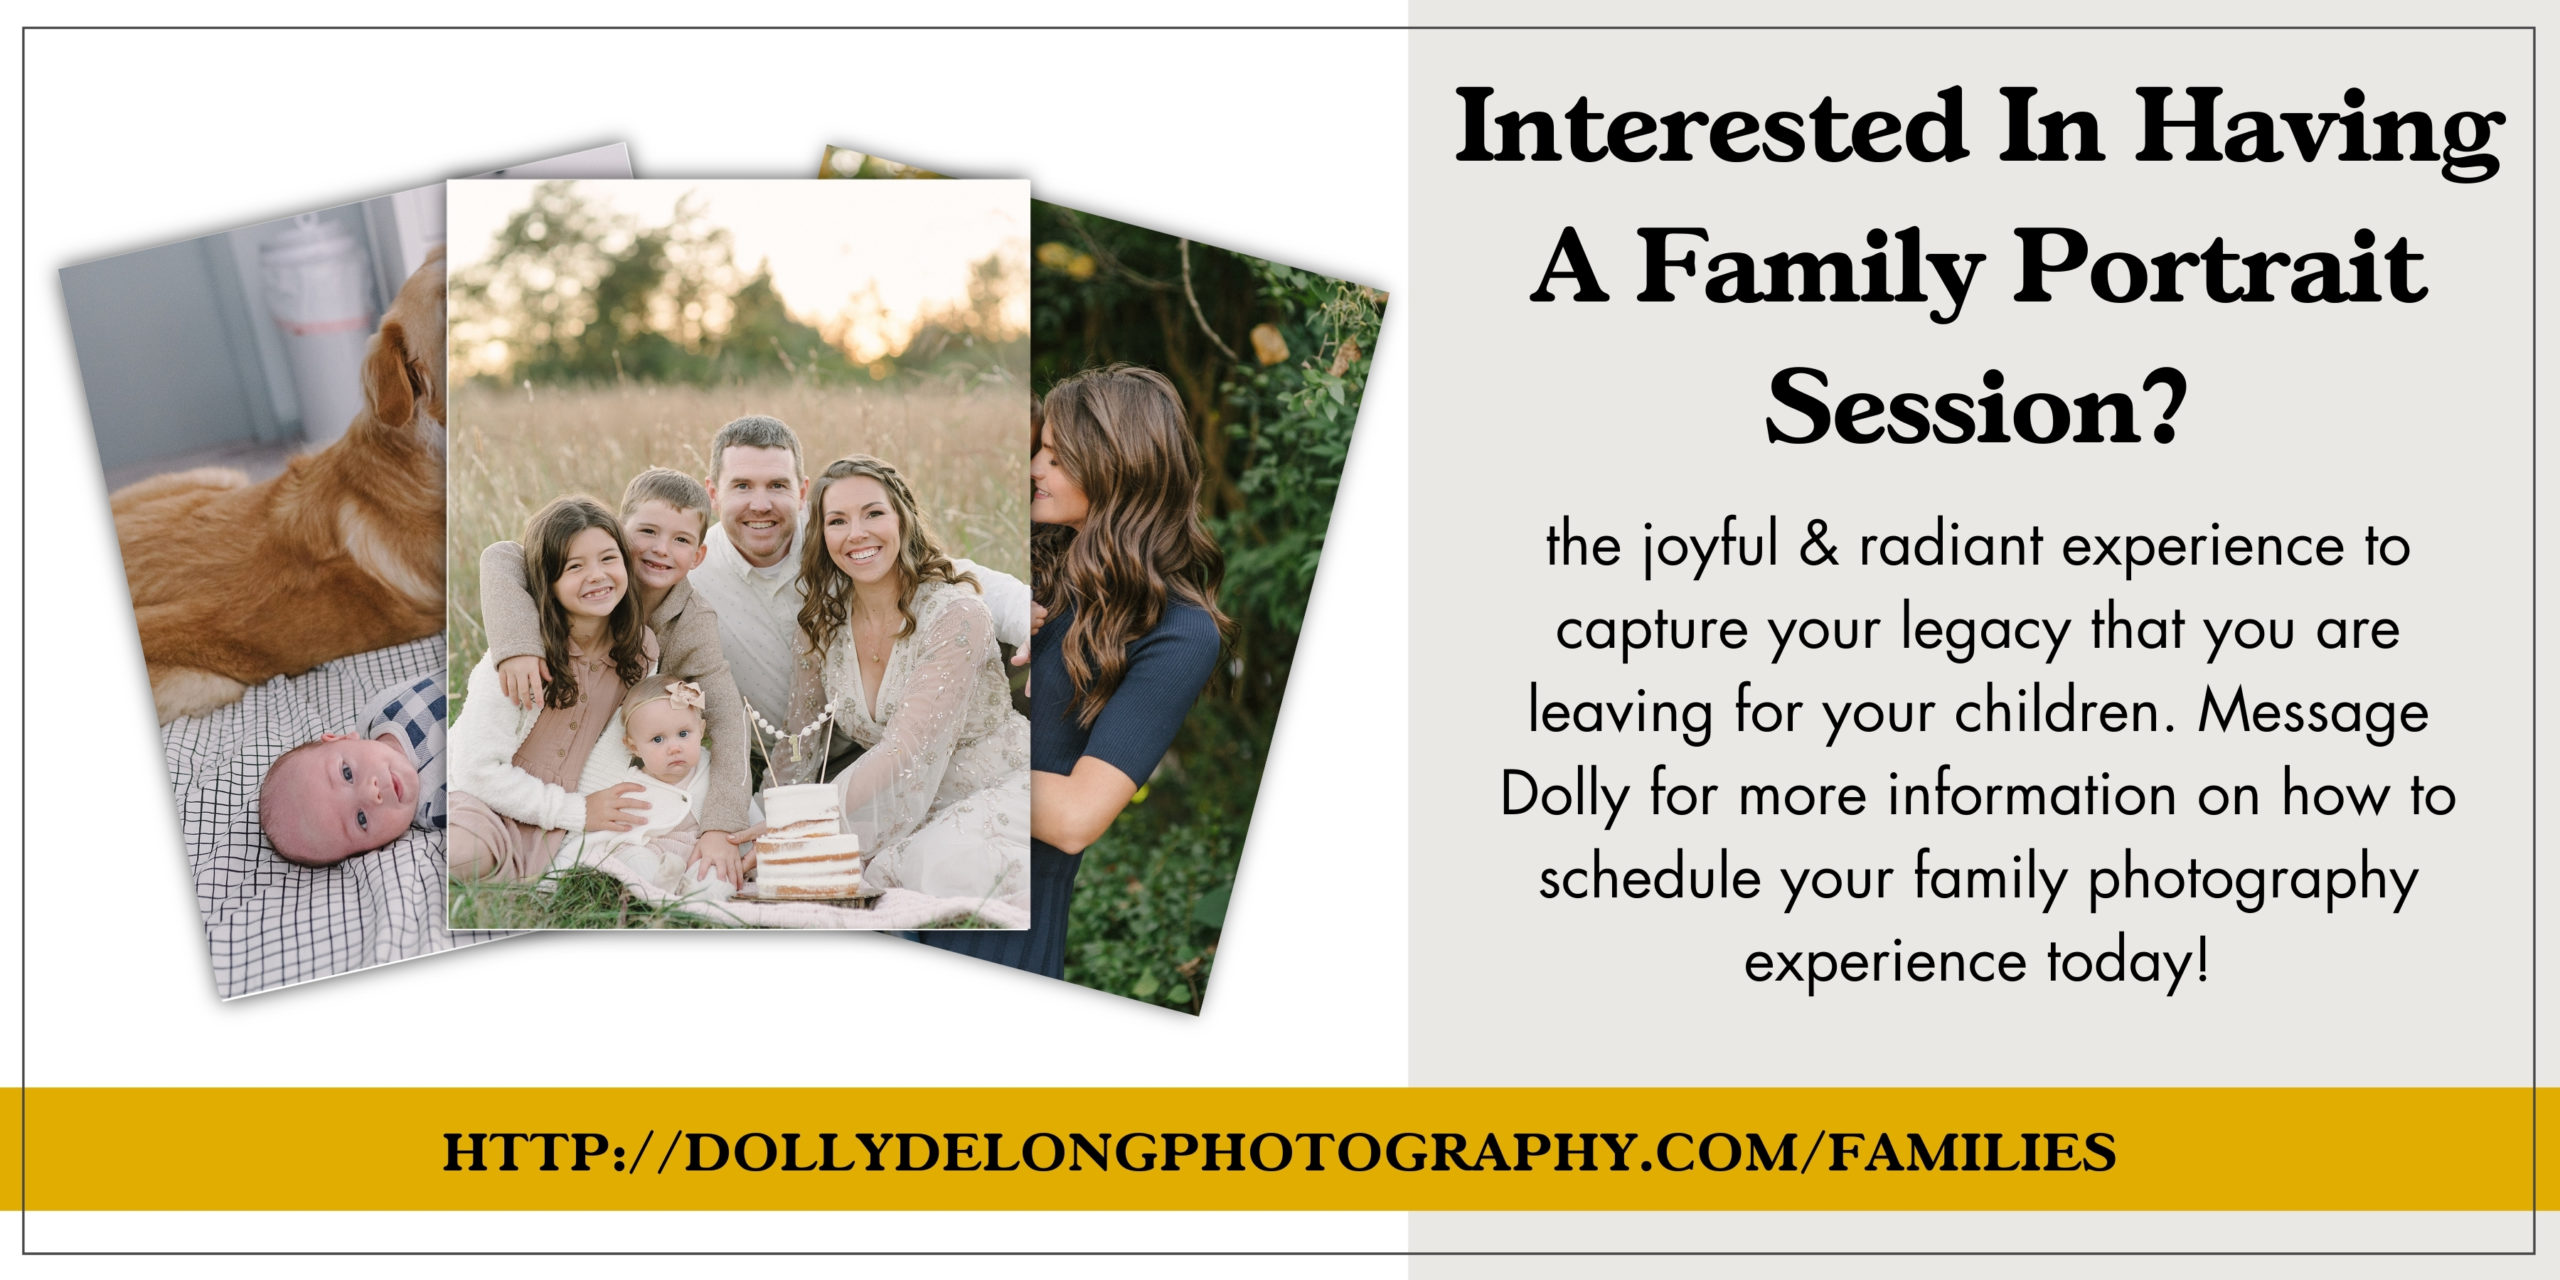 Work with Nashville family photographer Dolly DeLong